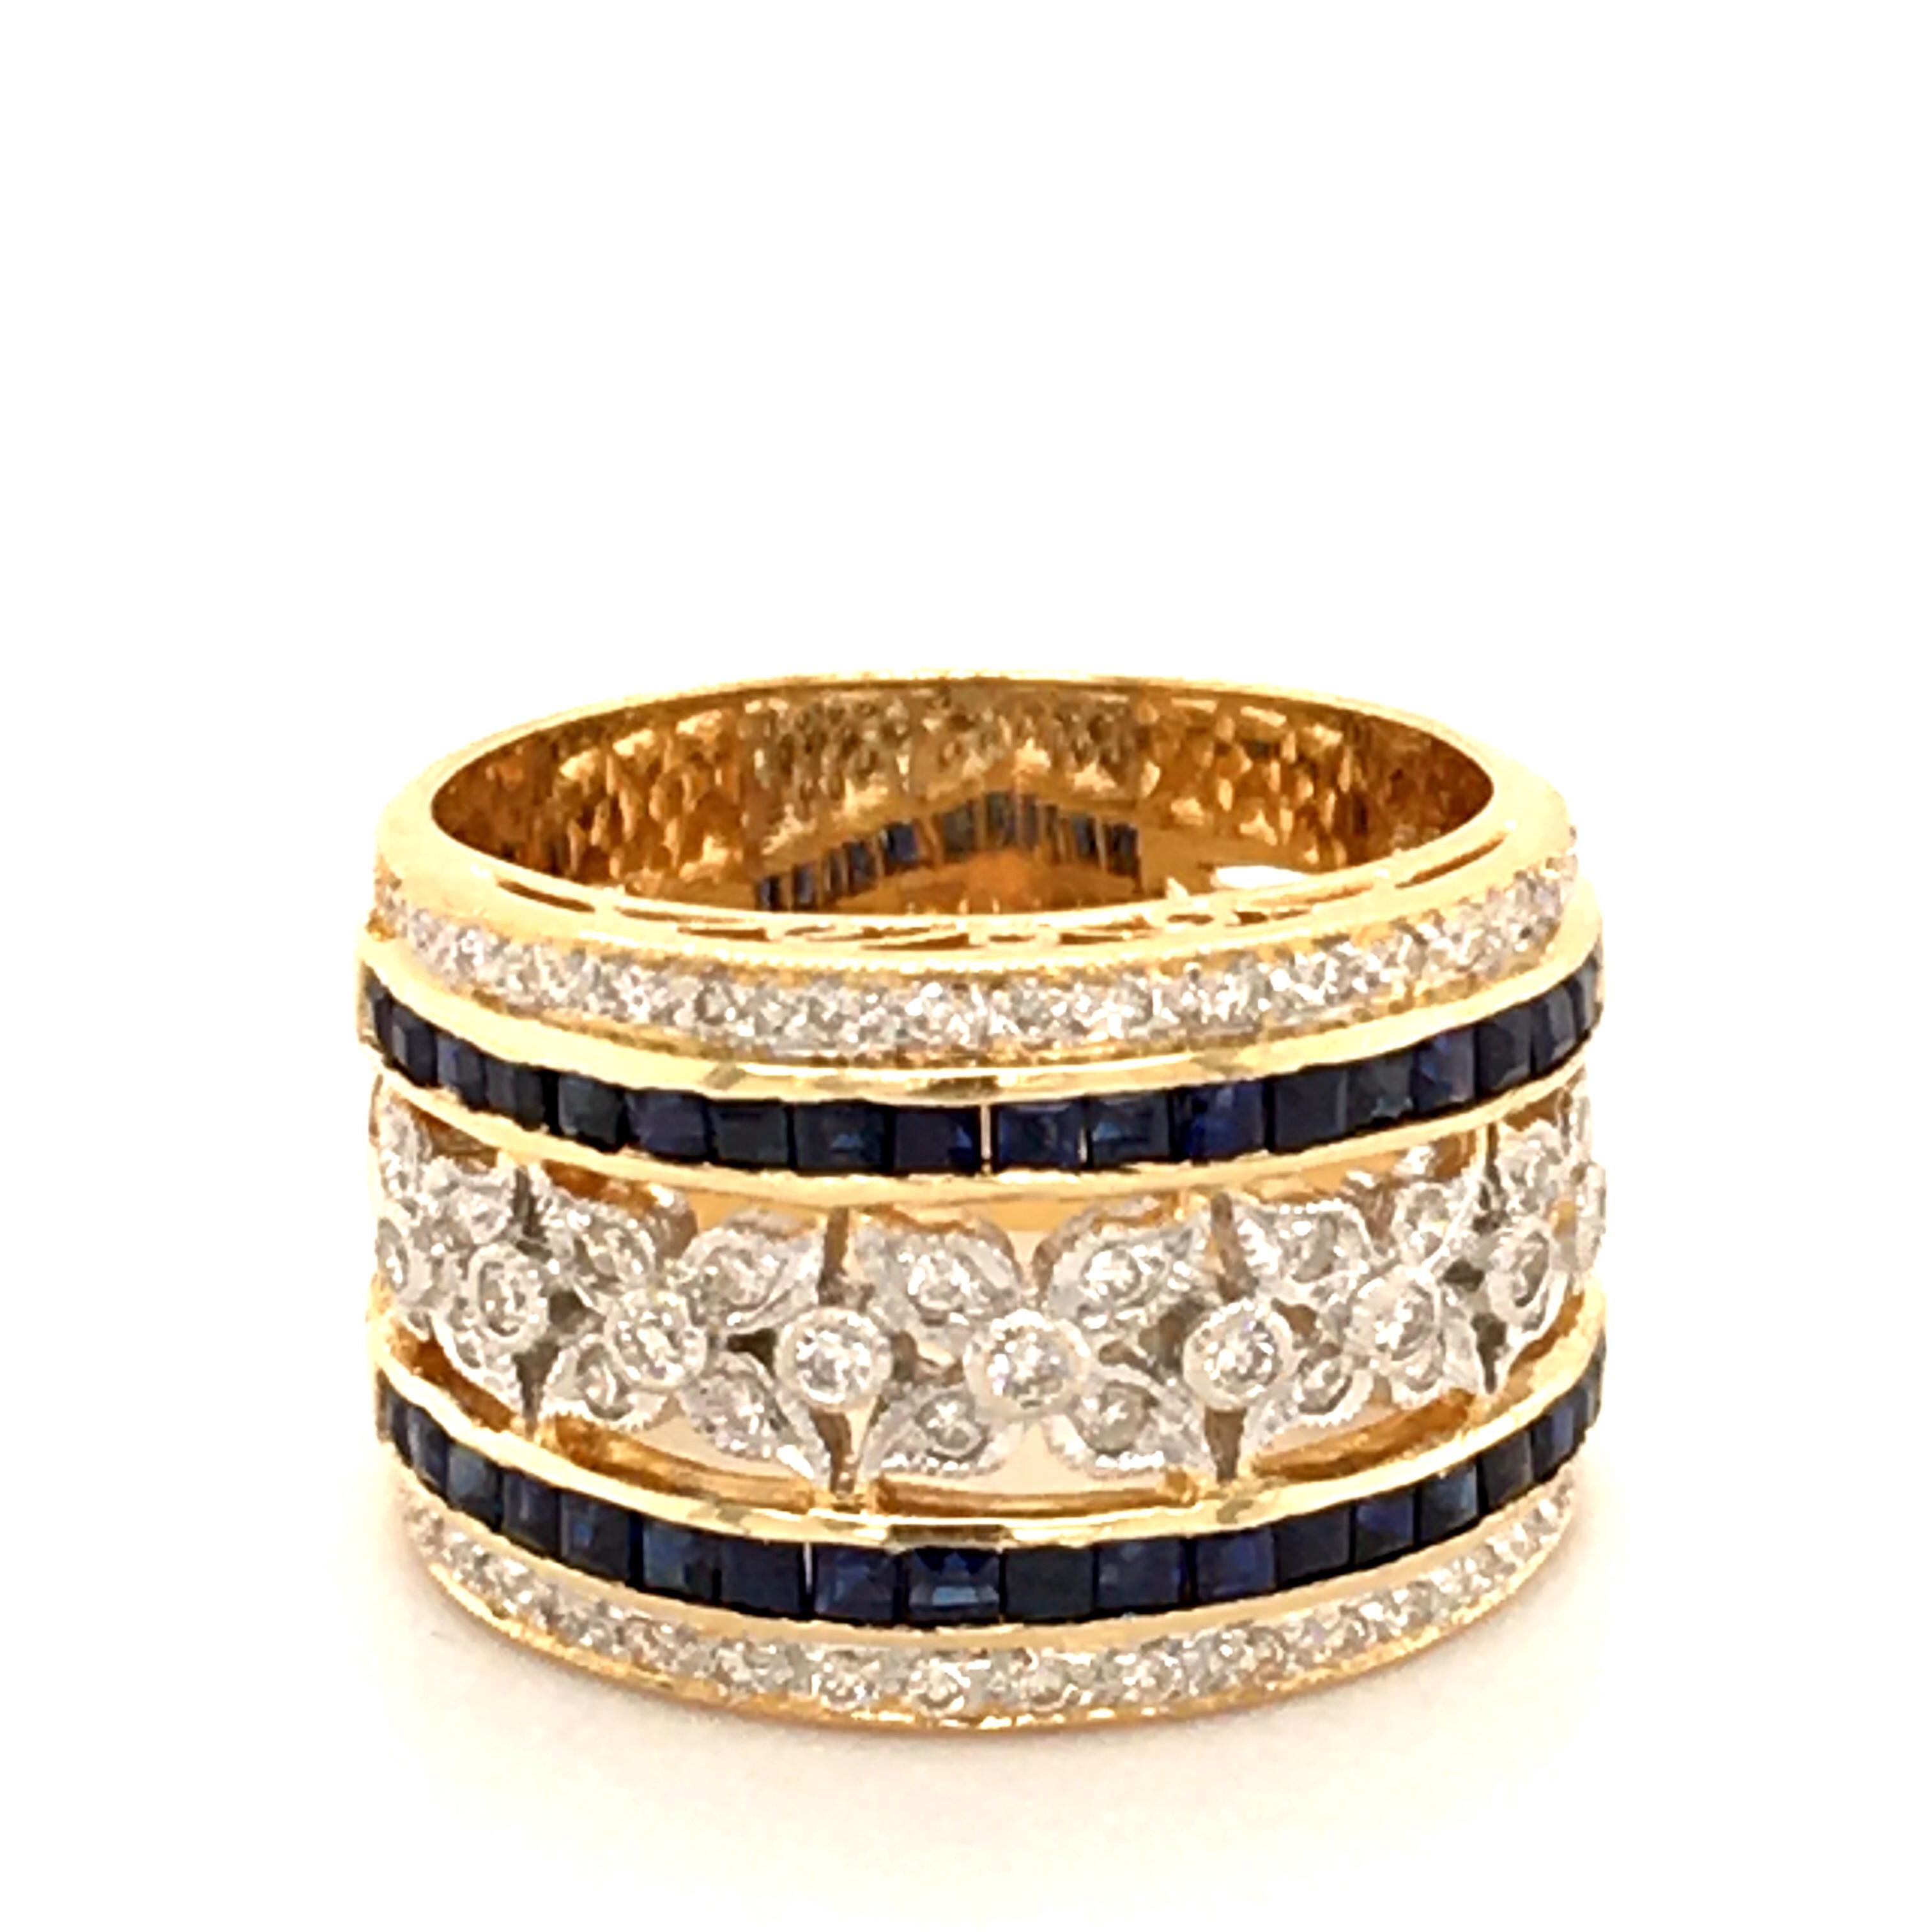 Brilliant Cut Sapphire and Diamond Ring in 18 Karat Yellow and White Gold